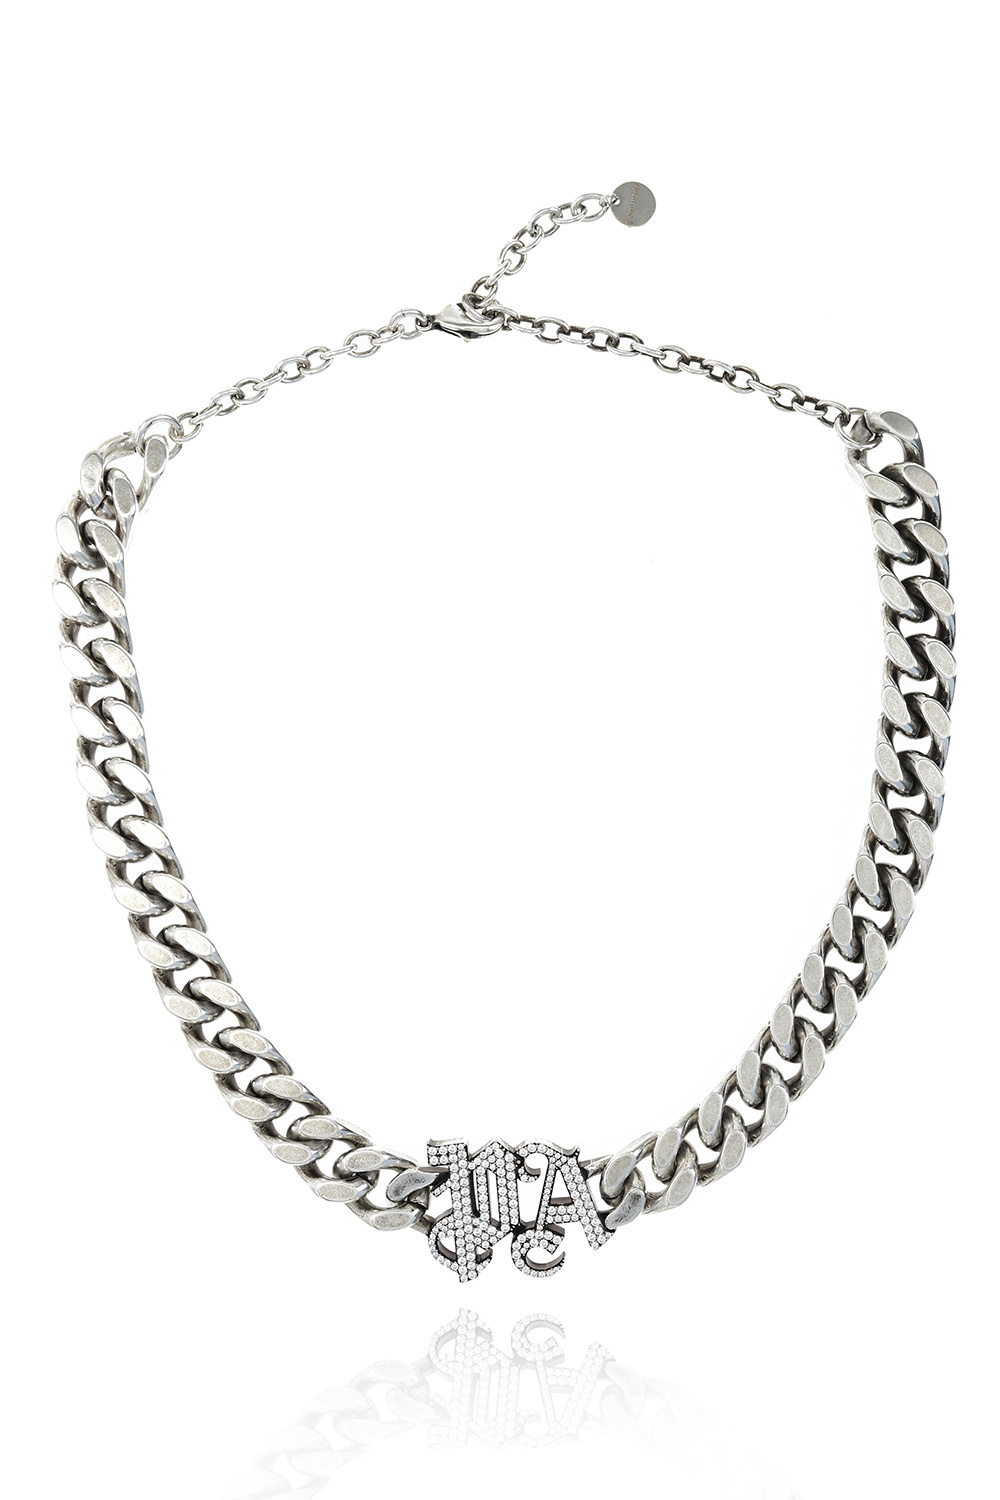 Palm Angels Silver 'PA' Monogram Chain Necklace